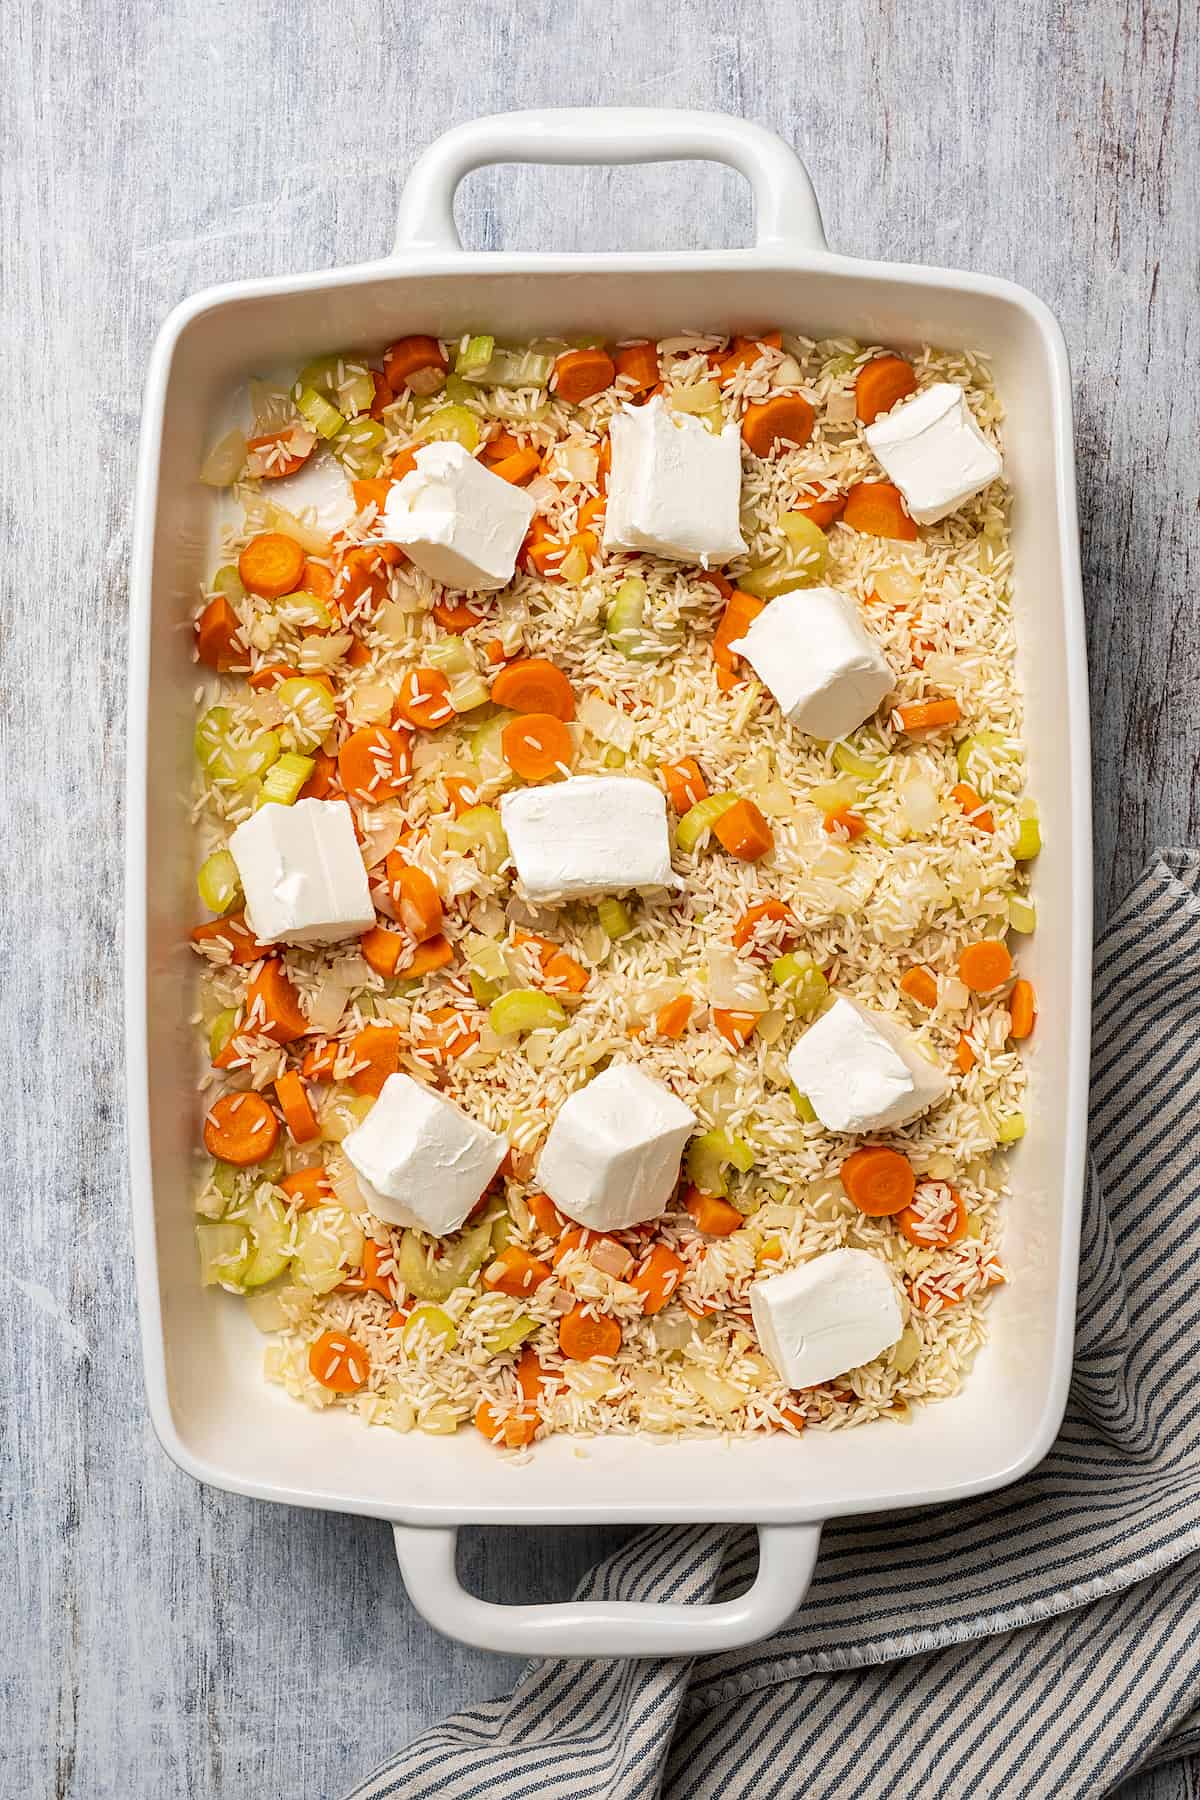 Cubed cream cheese dotted over a baking dish of rice and vegetables.